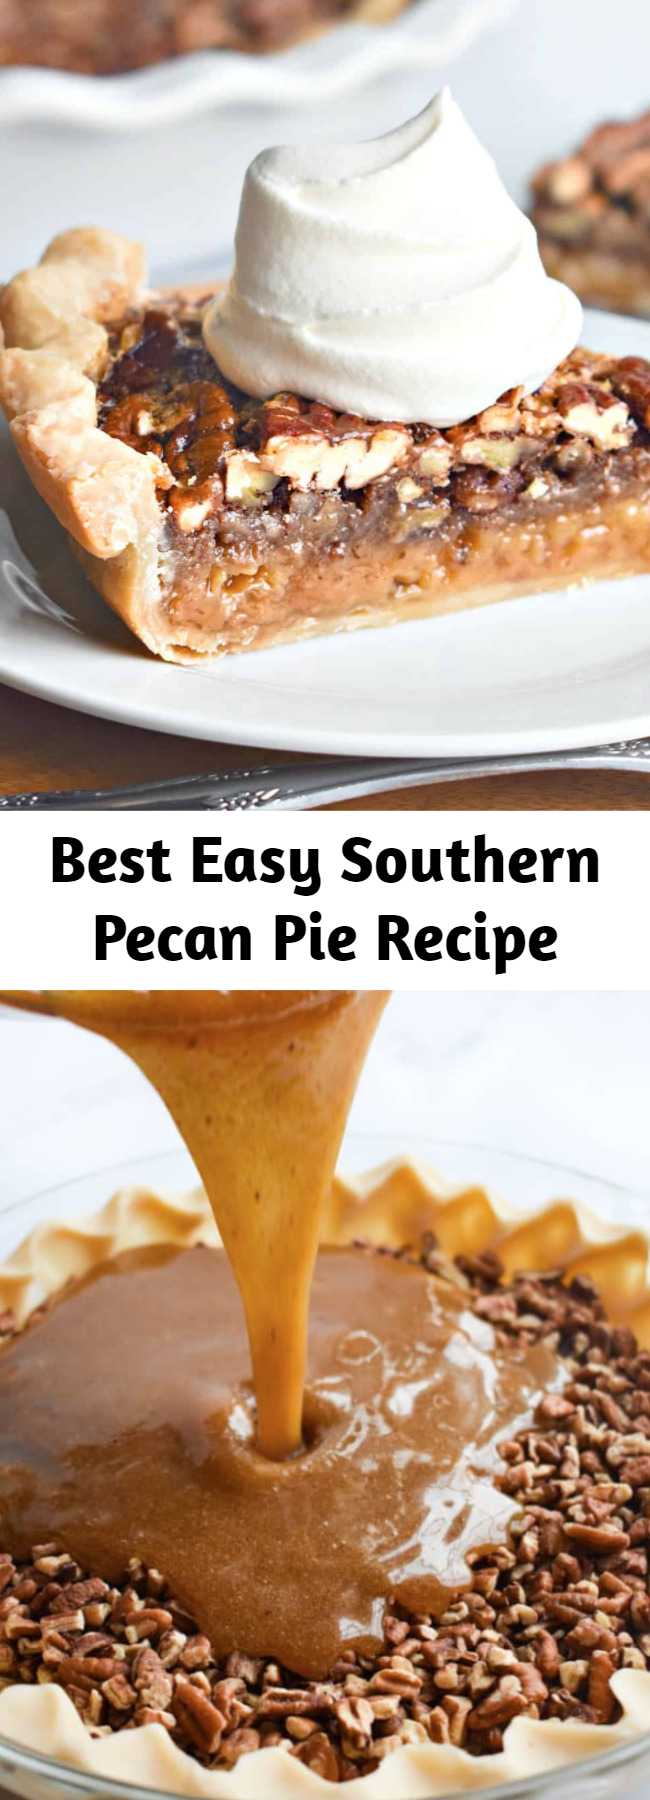 Best Easy Southern Pecan Pie Recipe - The Best Southern Pecan Pie is made with a flaky pie crust, real butter, dark corn syrup, a touch of cinnamon and fresh pecans.